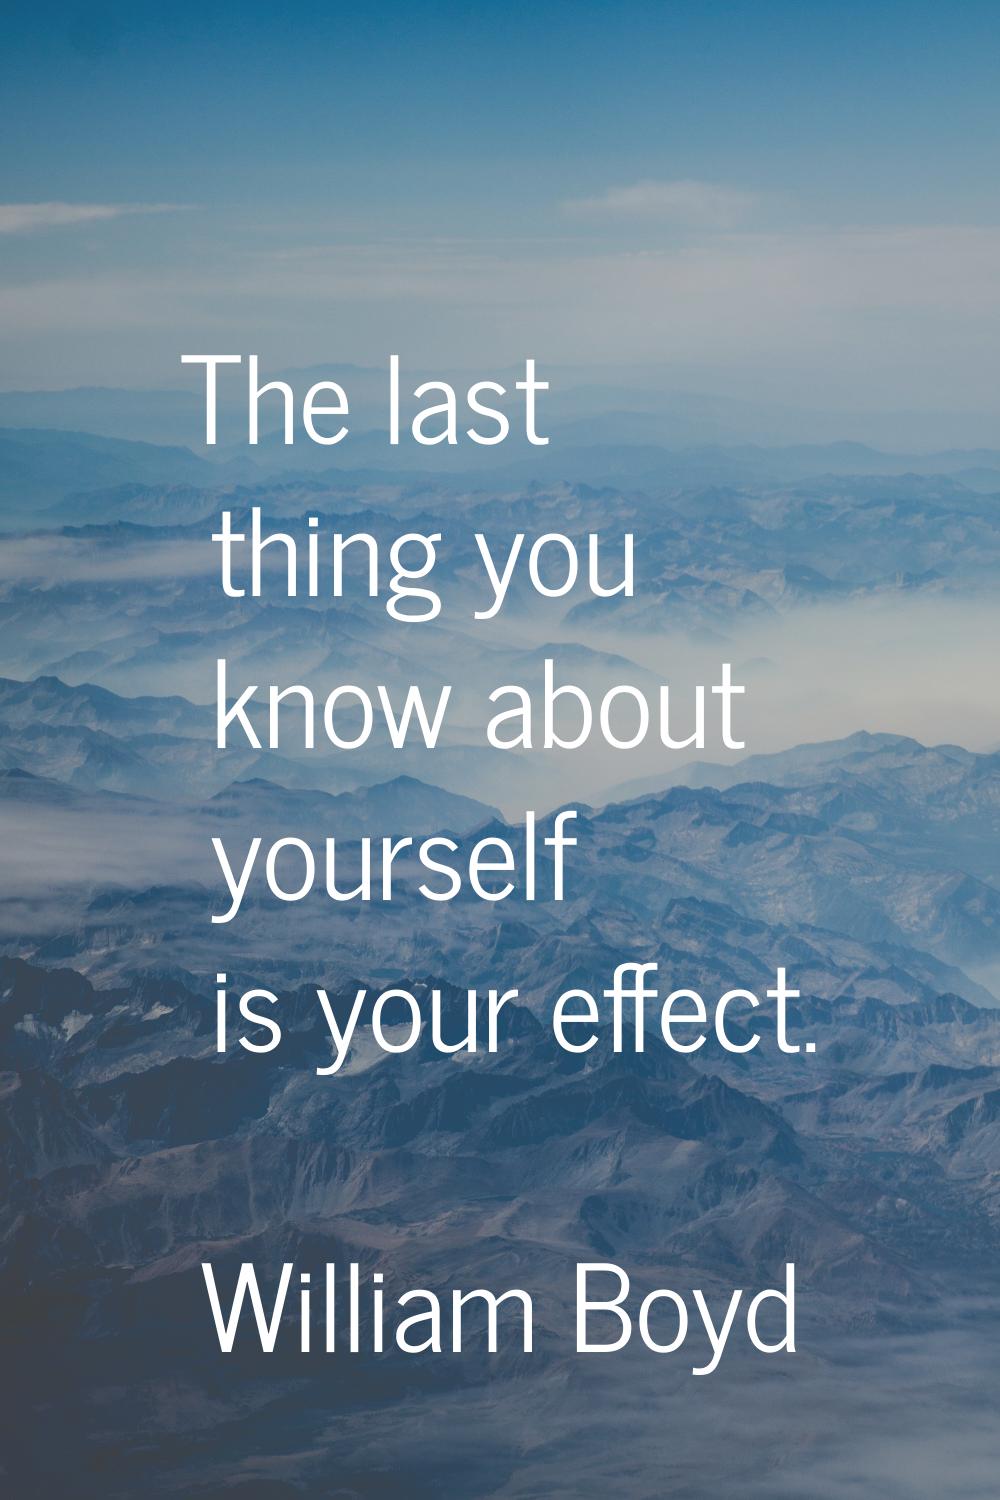 The last thing you know about yourself is your effect.